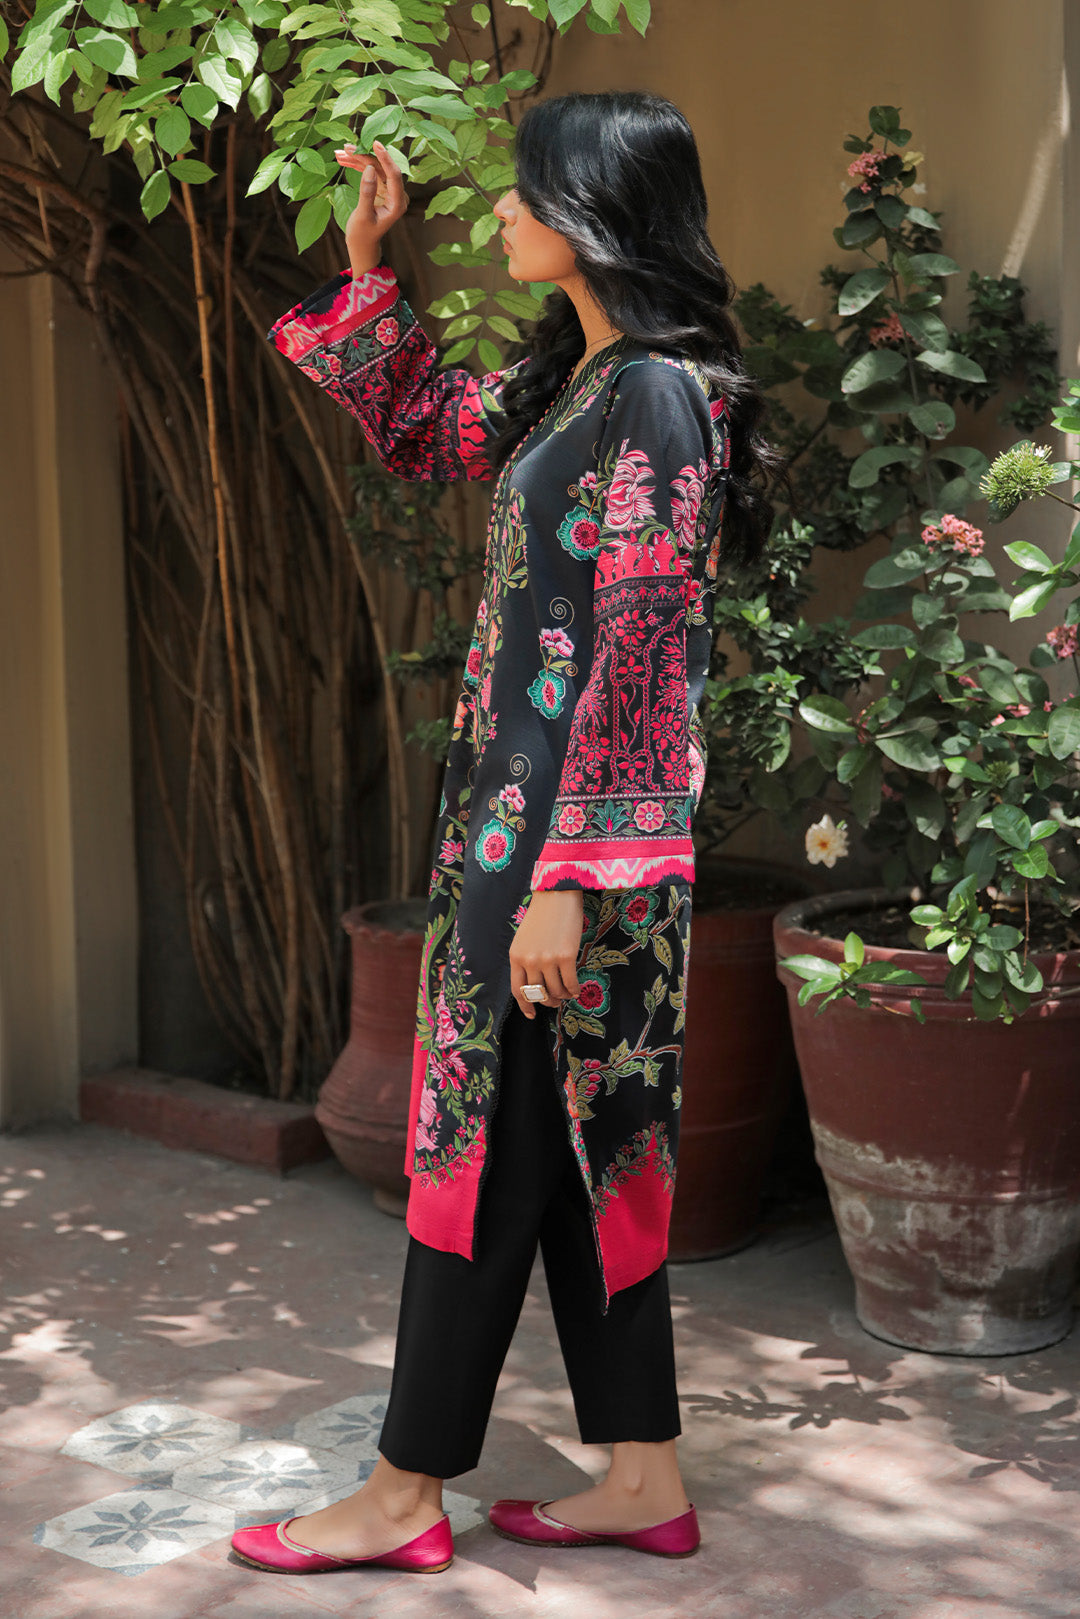 1 Piece - Embroidered Digital Printed Textured Lawn Shirt P0602 (SO)